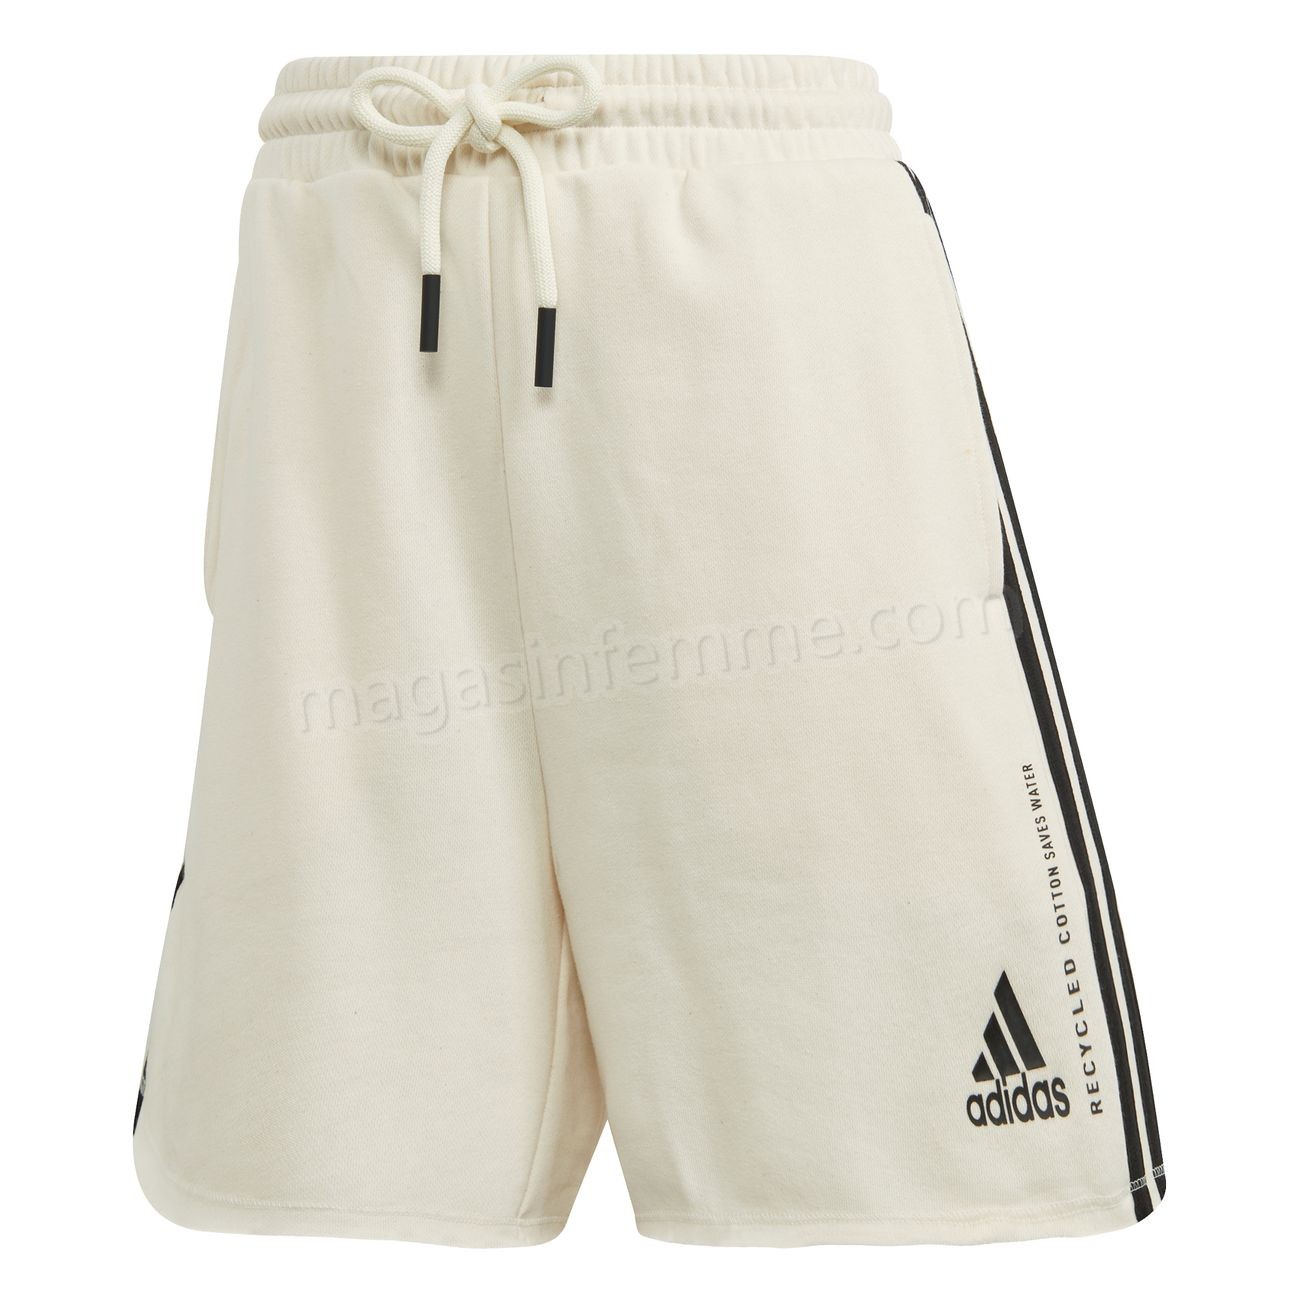 Adidas-Fitness femme ADIDAS Short femme adidas Must Haves Recycled Cotton en solde - Adidas-Fitness femme ADIDAS Short femme adidas Must Haves Recycled Cotton en solde